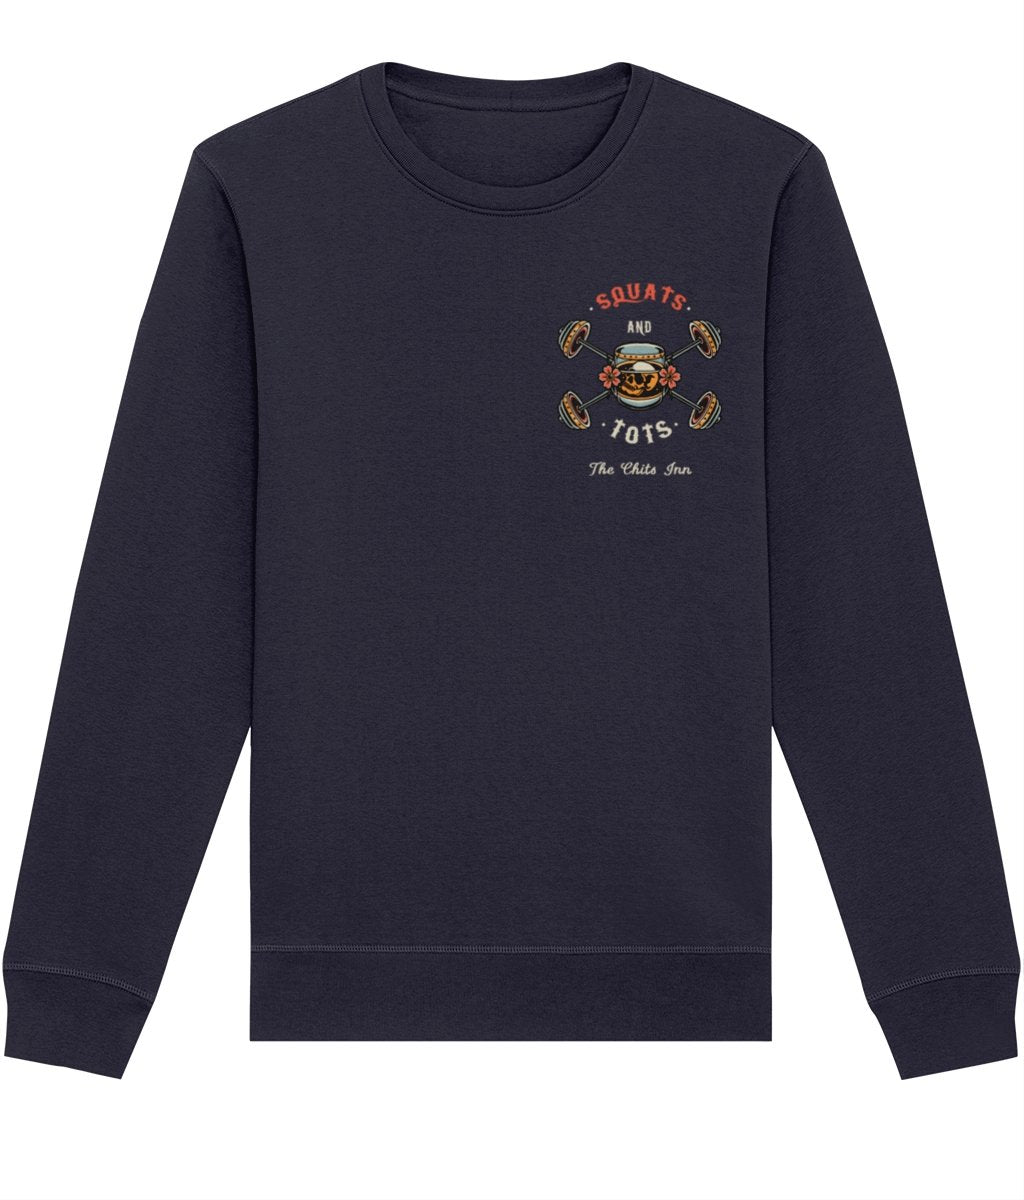 Squats and Tots Jumper - The Chits Inn